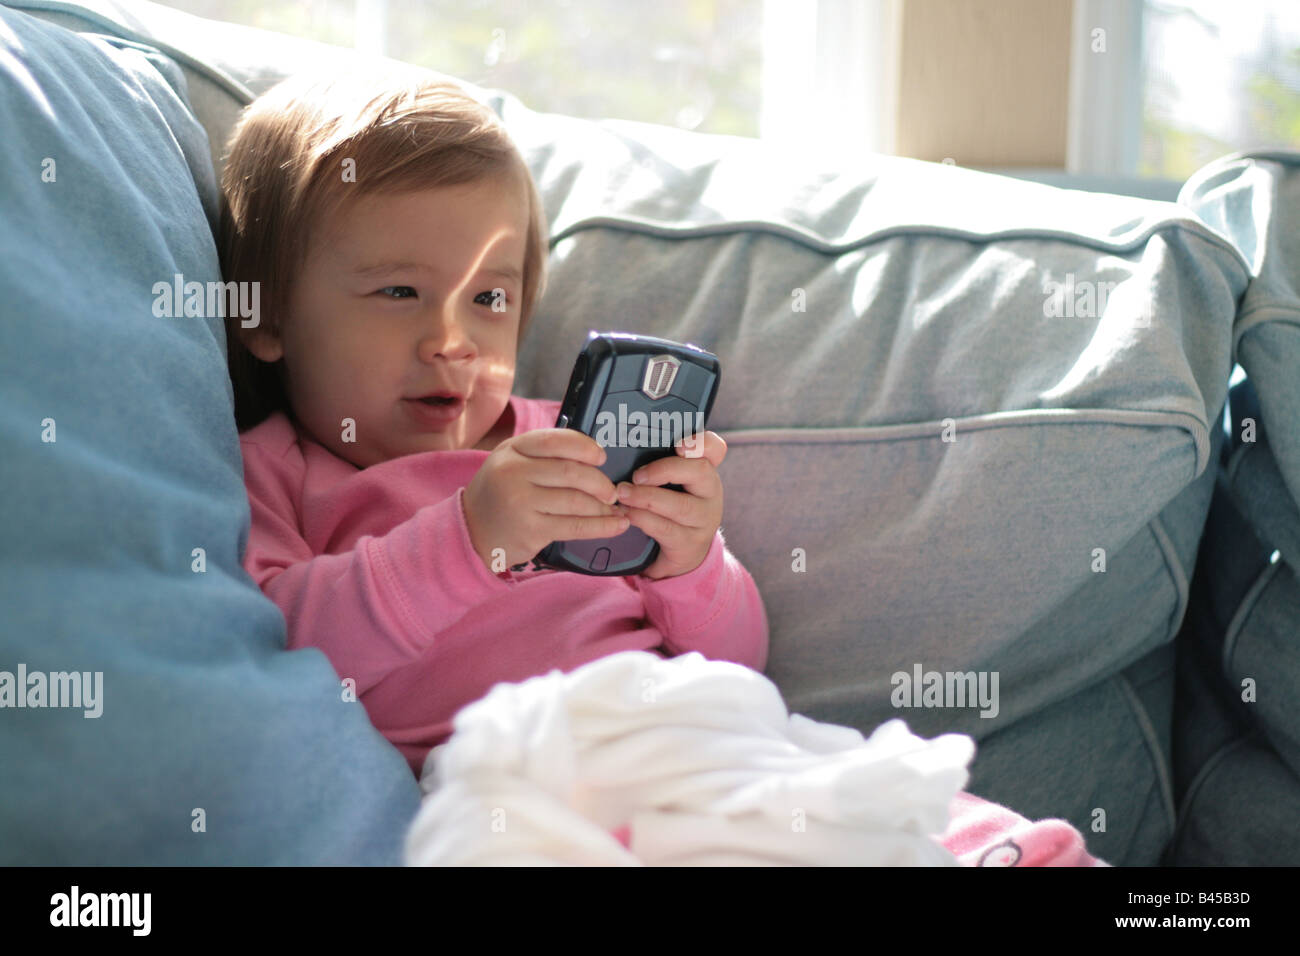 A 17-month-old toddler girl is excited by an email she is reading on a Blackberry device. Stock Photo